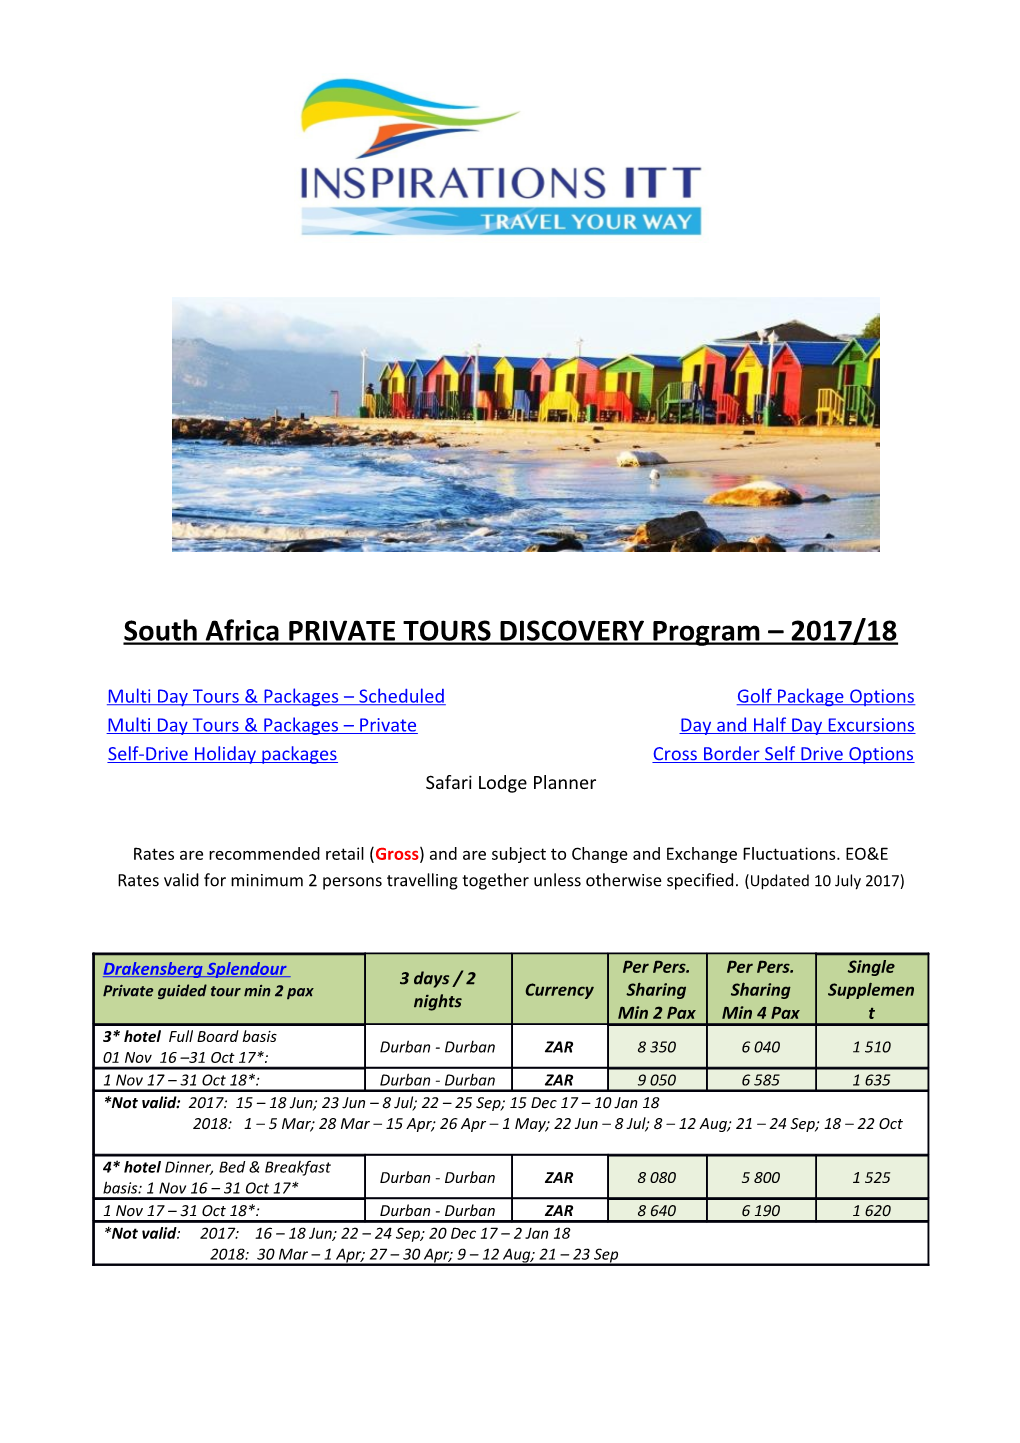 South Africa PRIVATE TOURS DISCOVERY Program 2017/18